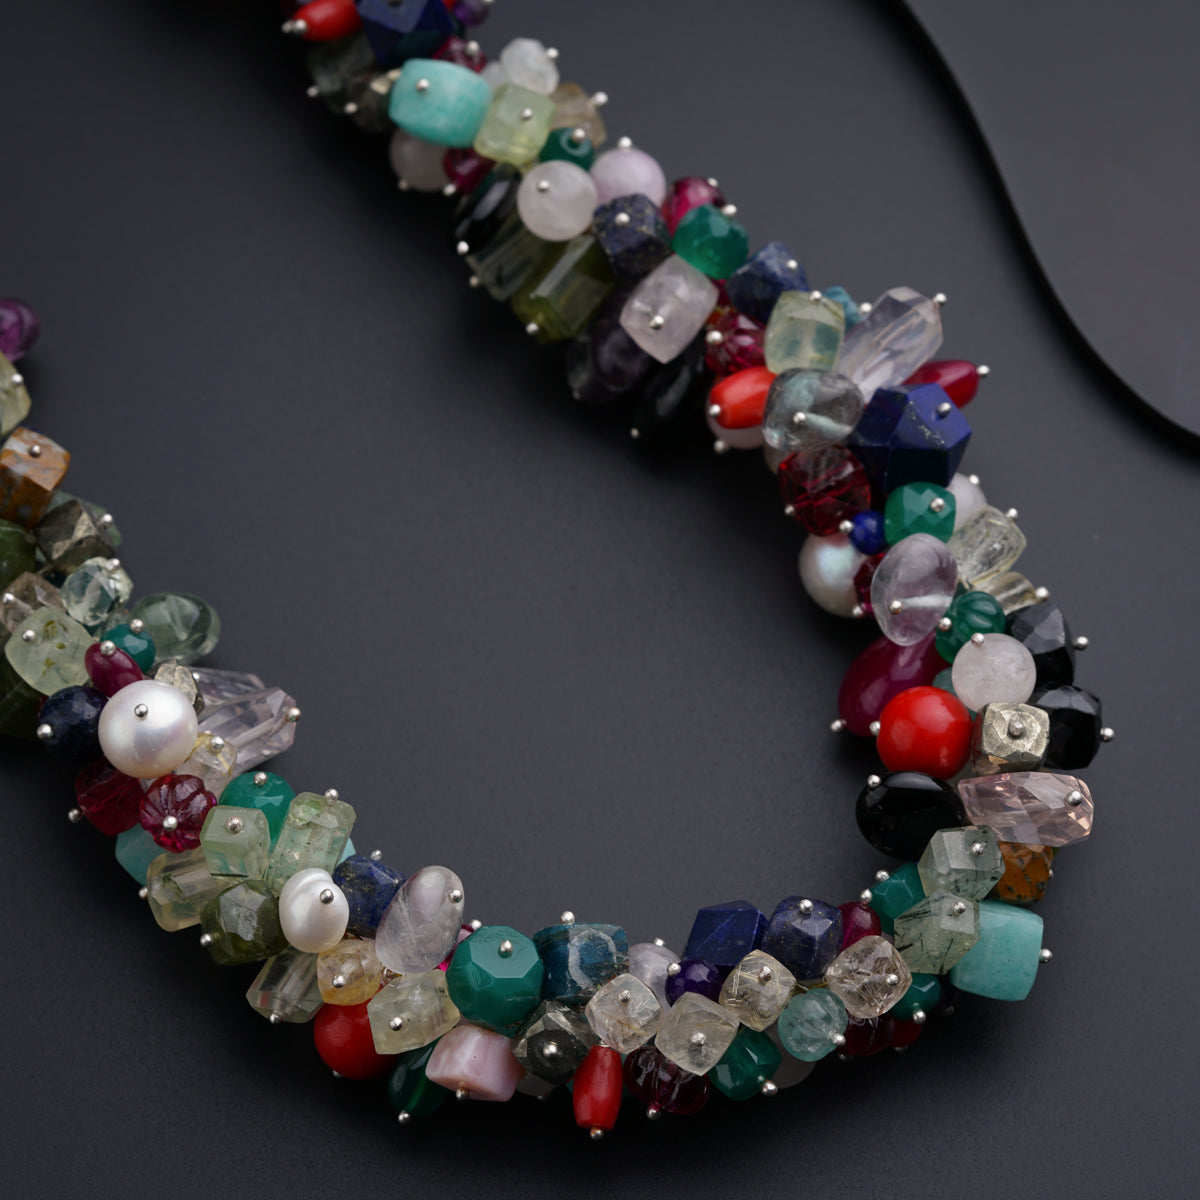 a multi - colored beaded necklace on a black surface